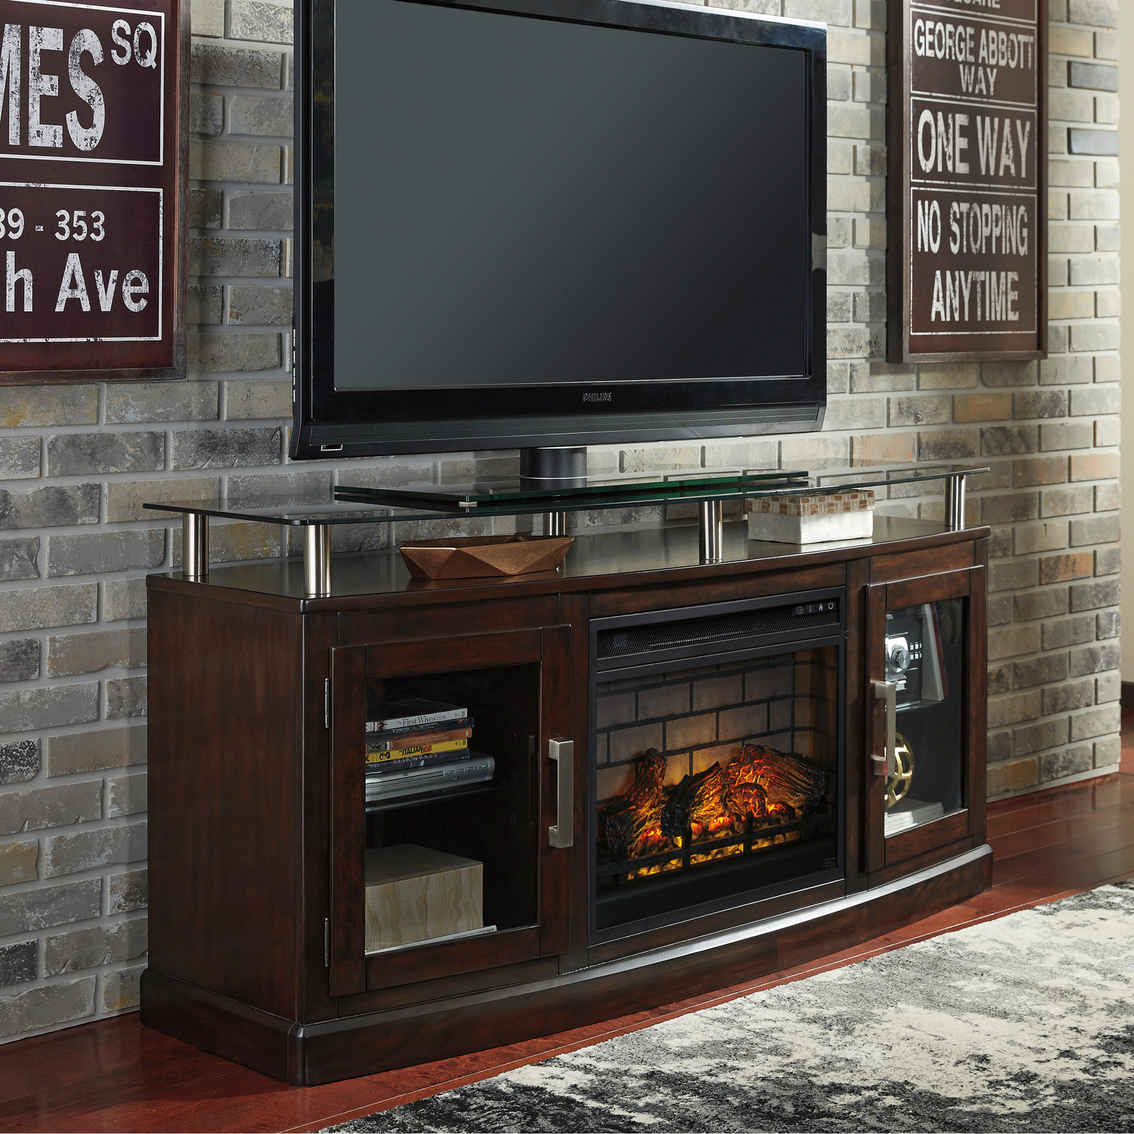 Ashley Chanceen TV Stand with Fireplace Insert - Image 2 of 2